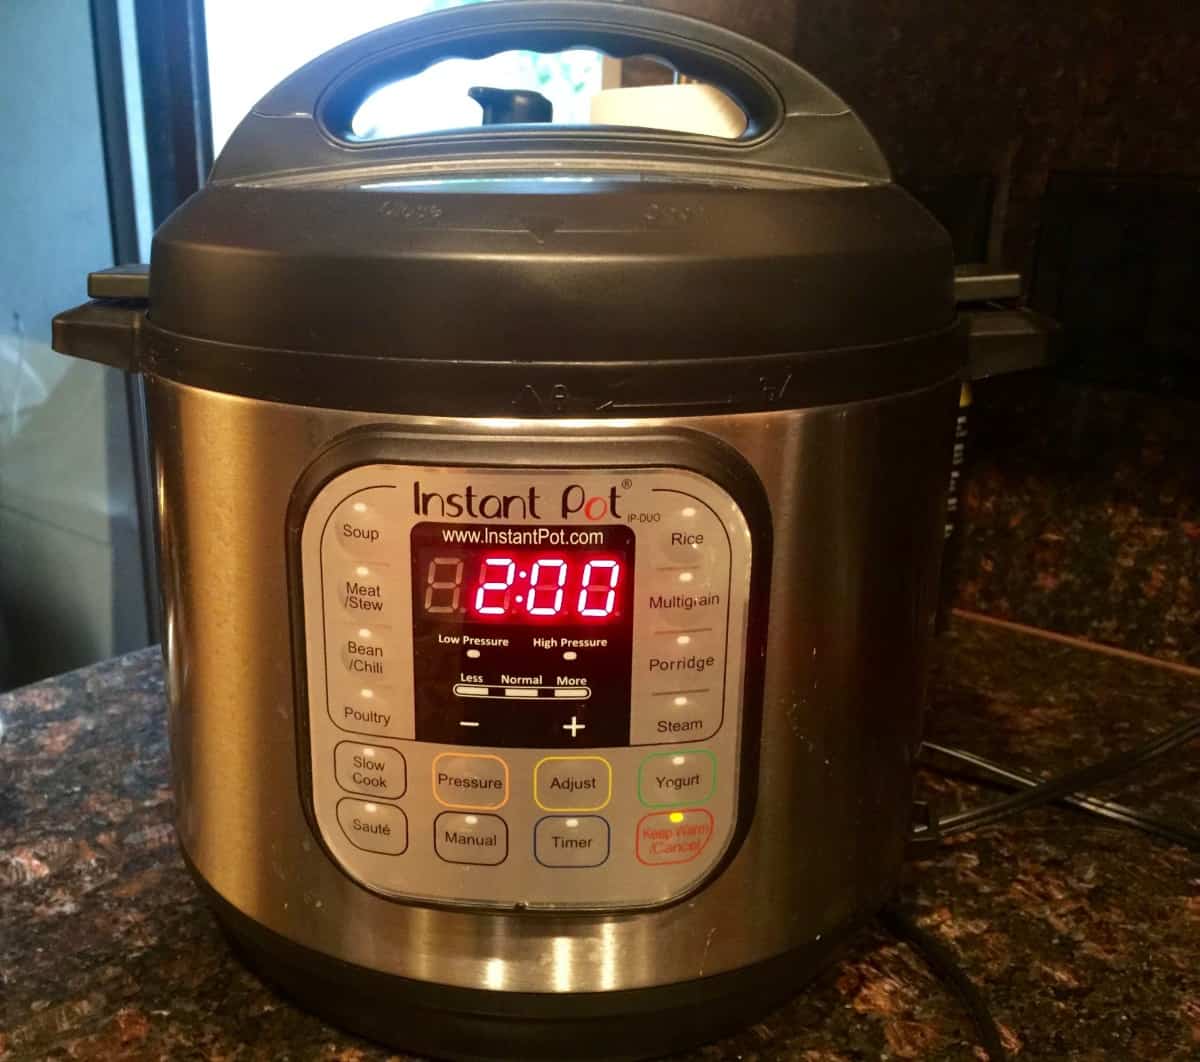 Instant Pot set to two minutes High pressure.